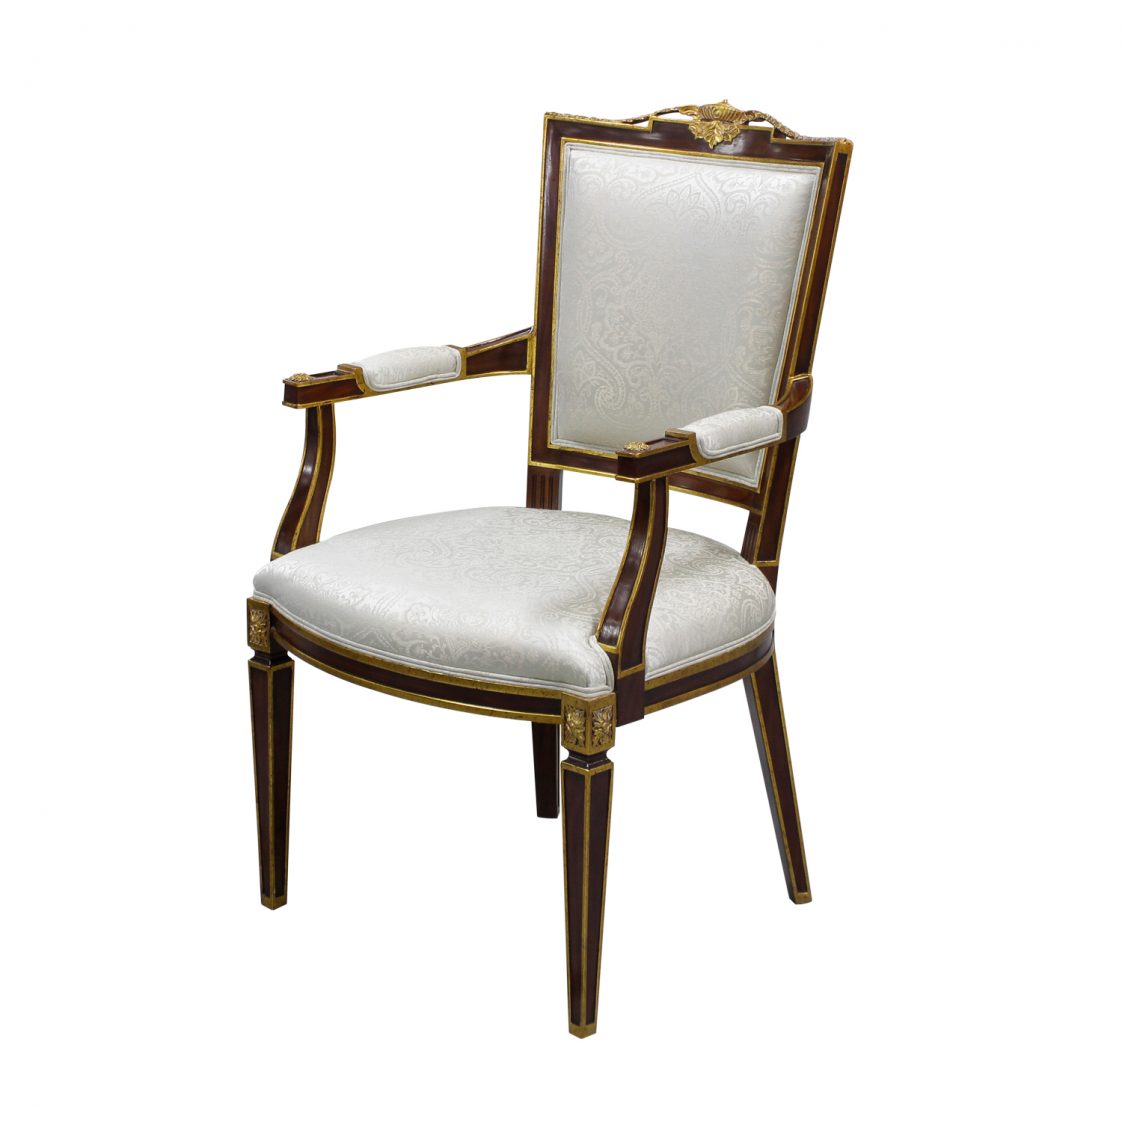 Directoire Style End Chair - Gold Accents